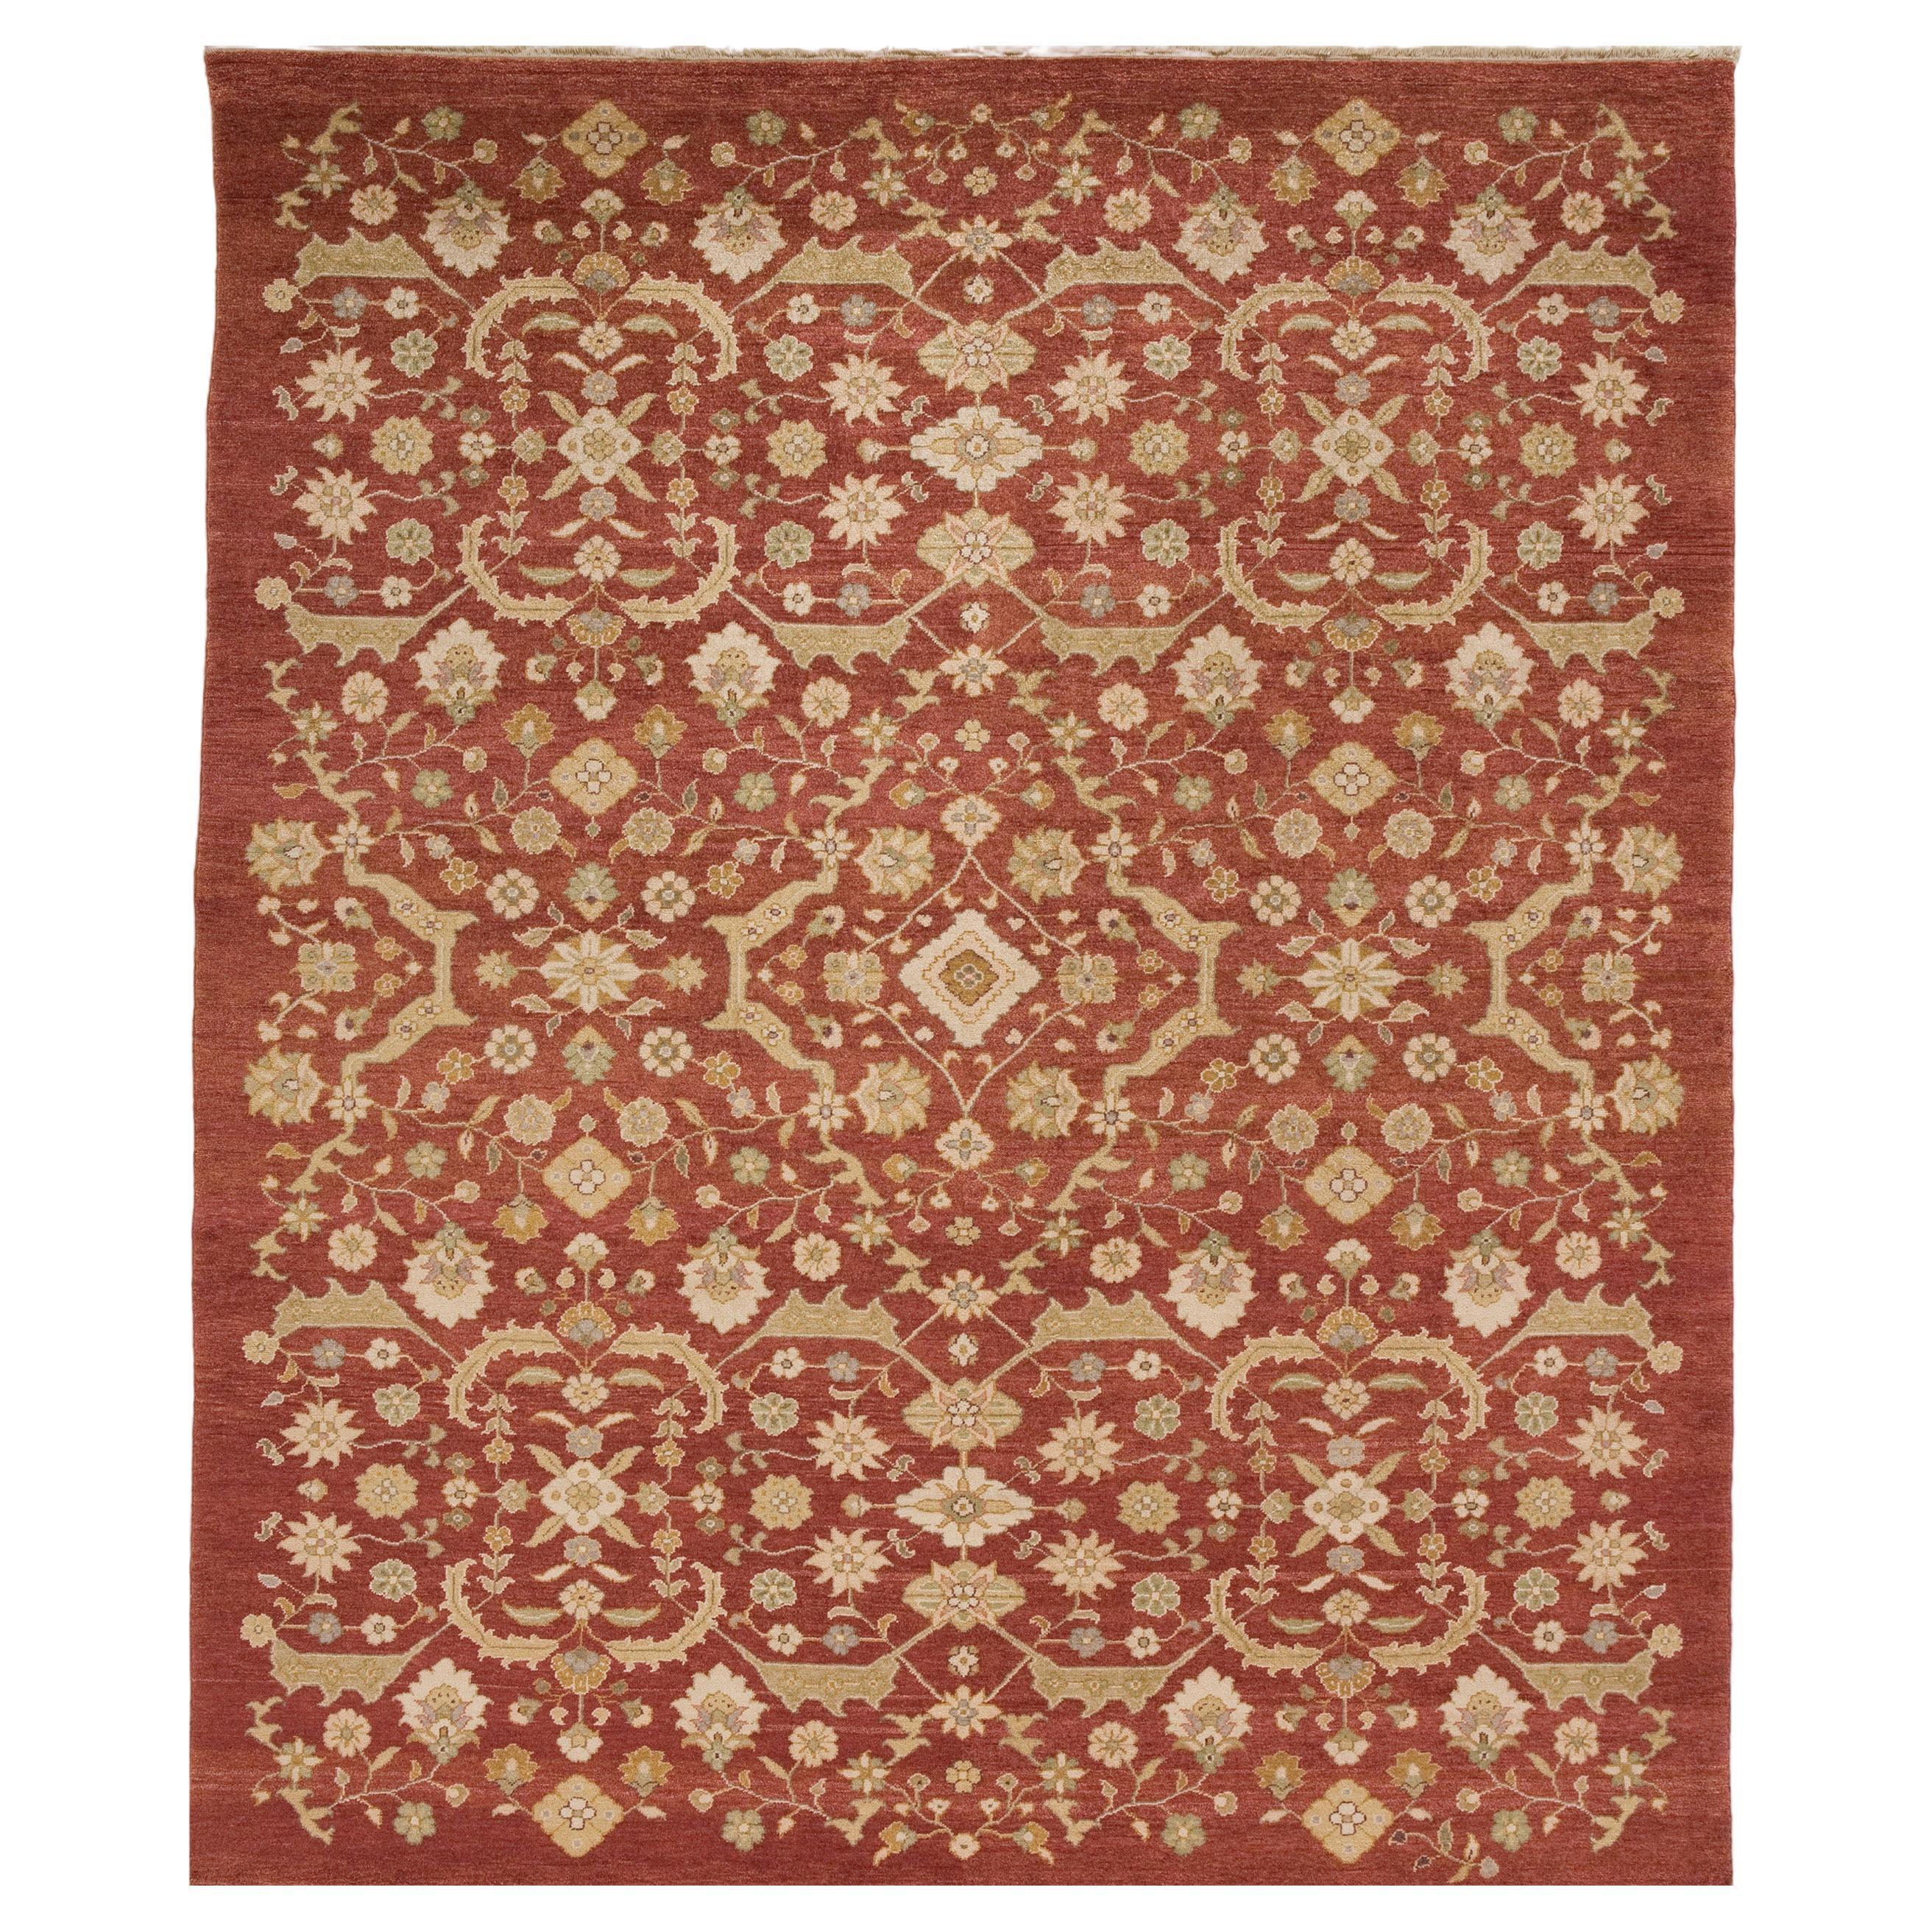 Luxury Traditional Hand-Knotted Ferrahan Red 12x15 Area Rug